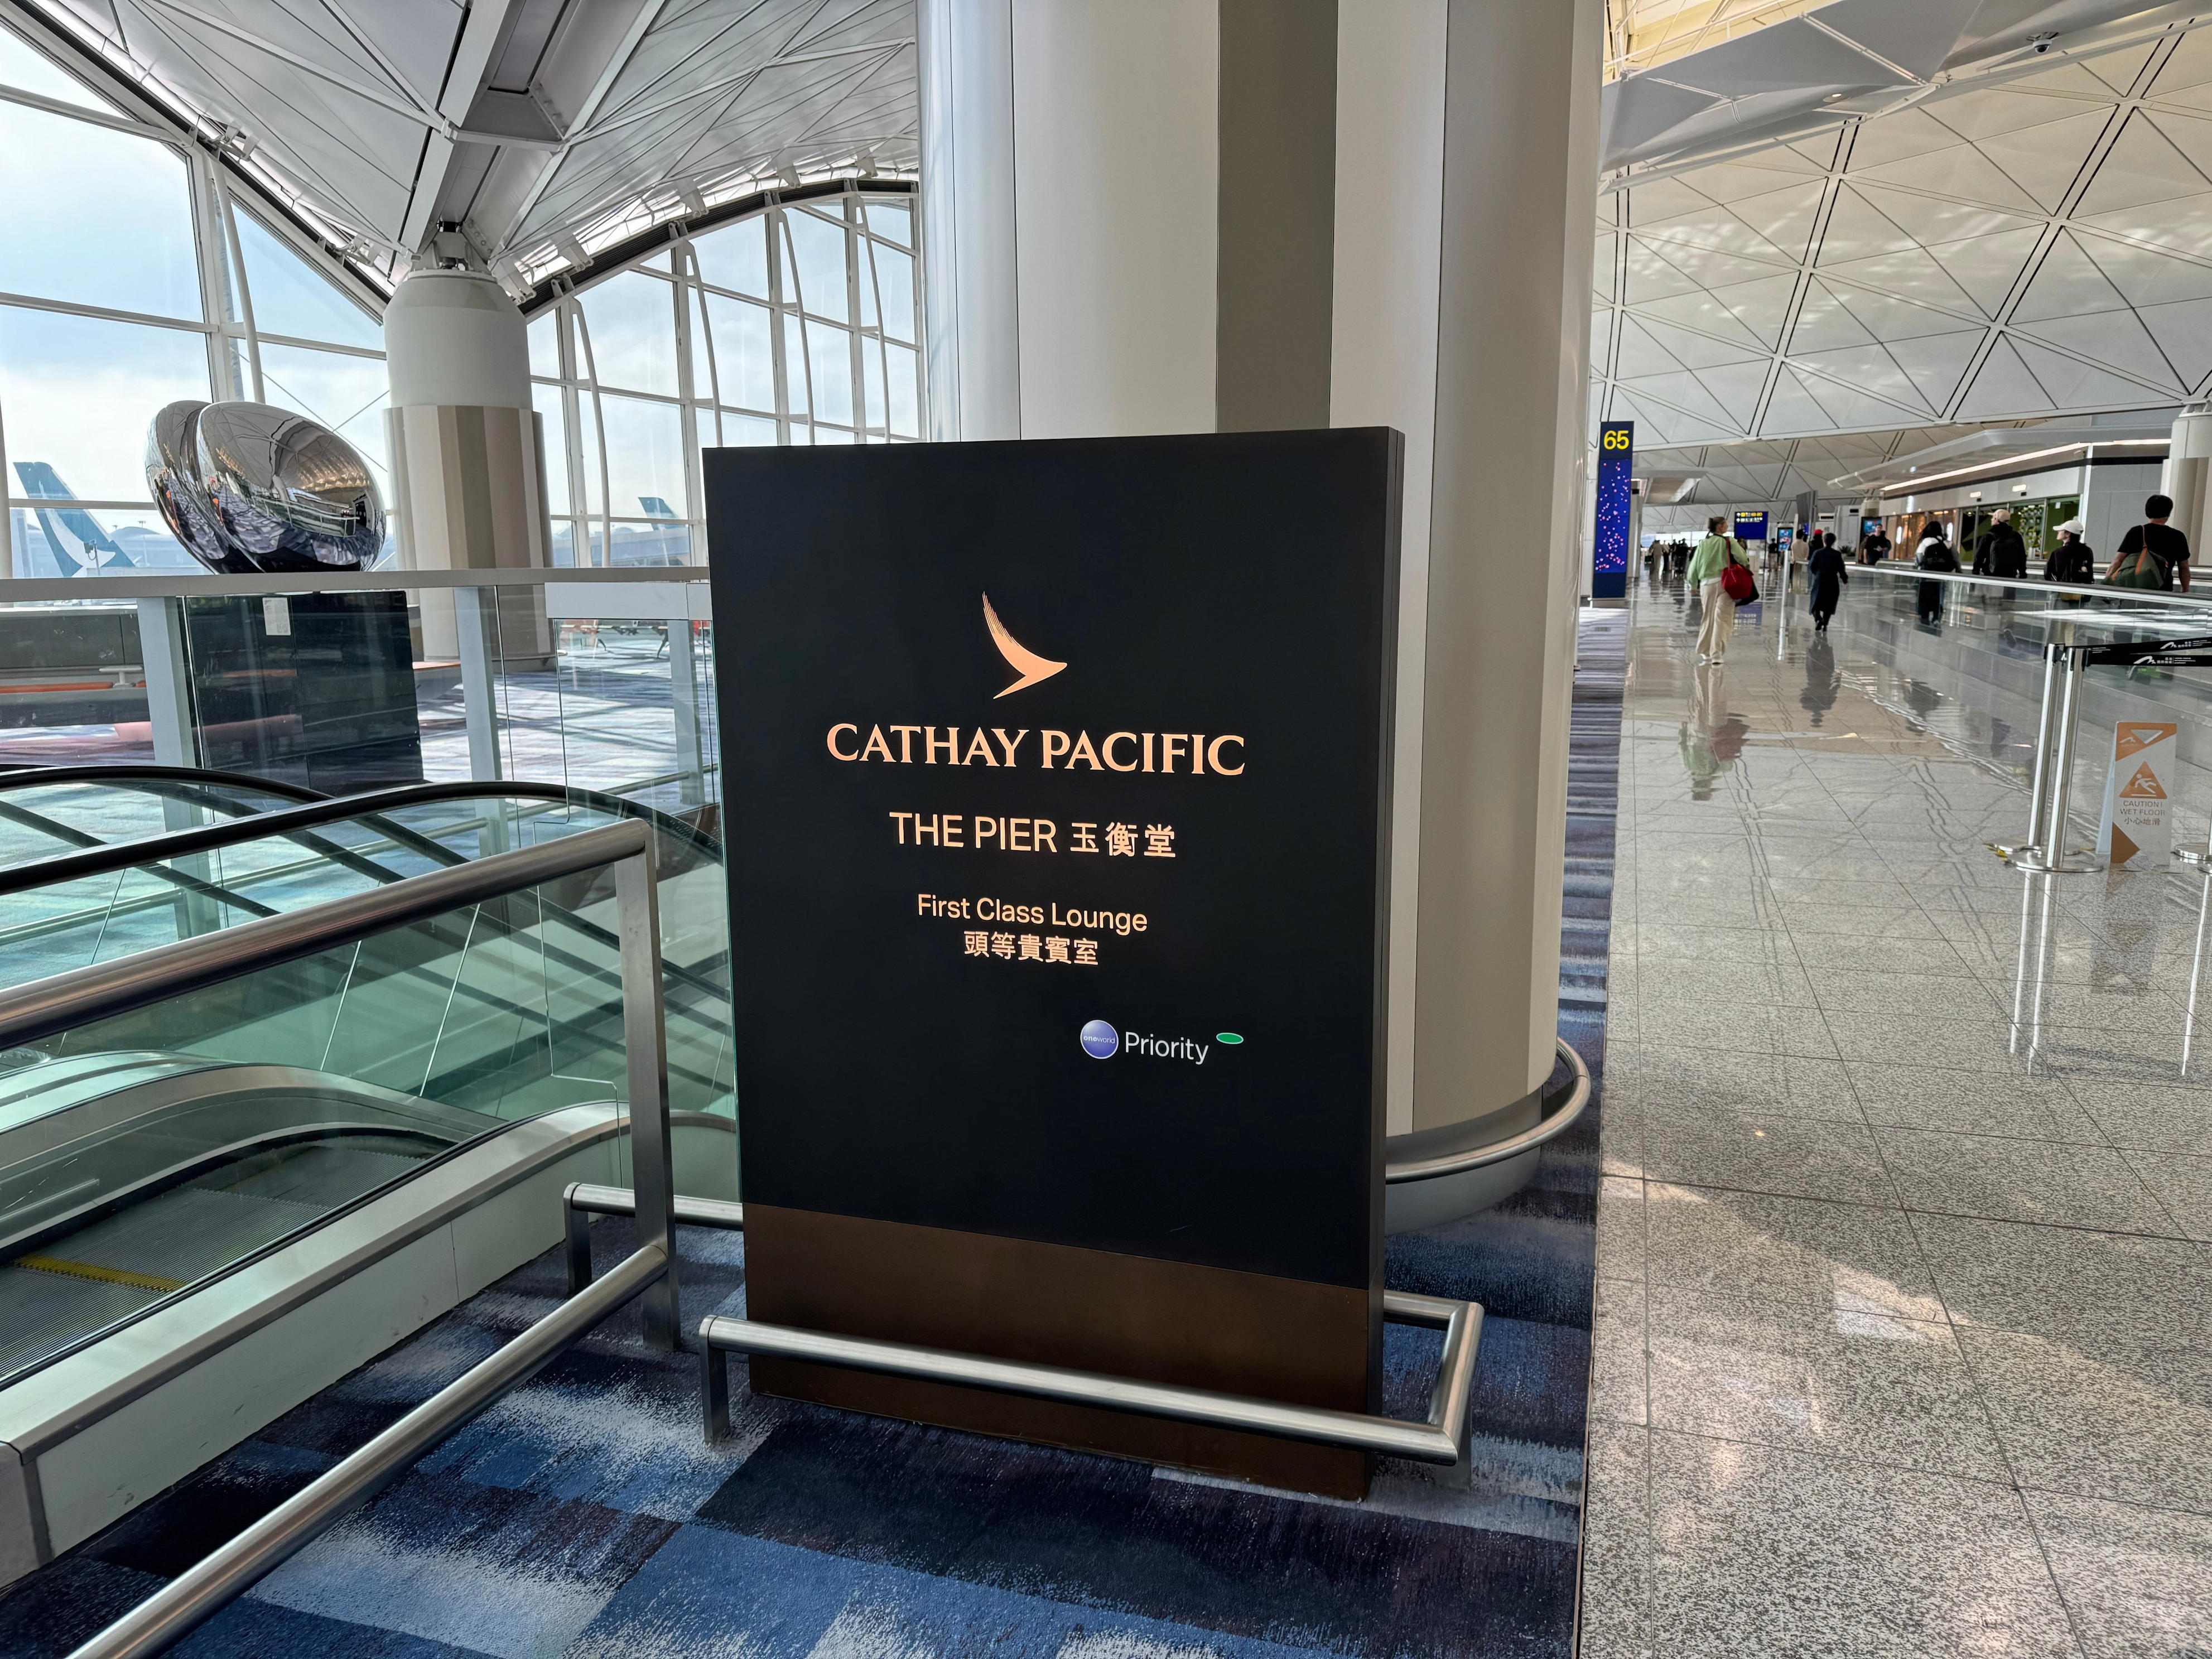 <ul class="summary-list"><li>I visited The Pier, a Cathay Pacific <a href="https://www.businessinsider.com/best-airplane-bars-in-first-class-virgin-etihad-emirates-qatar-2017-4">first-class lounge</a> at Hong Kong International Airport. </li><li>The lounge was one of the best I've ever visited and had tons of seating, a restaurant, and a spa. </li><li>I'd visit the lounge again — and I get why it's been called one of the best in the world.</li></ul><p>On a recent visit to <a href="https://www.businessinsider.com/sc/hong-kong-global-fintech-hub-2021-5">Hong Kong</a>, I visited The Pier, a Cathay Pacific first-class lounge, before my flight to New York.</p><p>The flagship lounge has a restaurant, stunning bar area, <a href="https://www.businessinsider.com/trying-private-room-at-airport-is-it-worth-it-photos-2022-7">nap rooms</a>, free WiFi, and complimentary massages. It's accessible for passengers flying first class on Cathay Pacific or another Oneworld carrier or for those with status as an Oneworld Emerald member.</p><p><a href="https://www.businessinsider.com/priority-pass-lounges-airport-access-business-travelers-2018-8">Airport lounges</a> have been touted by many as the secret to making air travel far less miserable, and with ones as nice as this I can see why.</p><p>Here's what my experience was like at The Pier, one of Cathay Pacific's first-class lounges at Hong Kong International Airport.</p><div class="read-original">Read the original article on <a href="https://www.businessinsider.com/best-first-class-lounge-hong-kong-cathay-pacific-the-pier-2024">Business Insider</a></div>